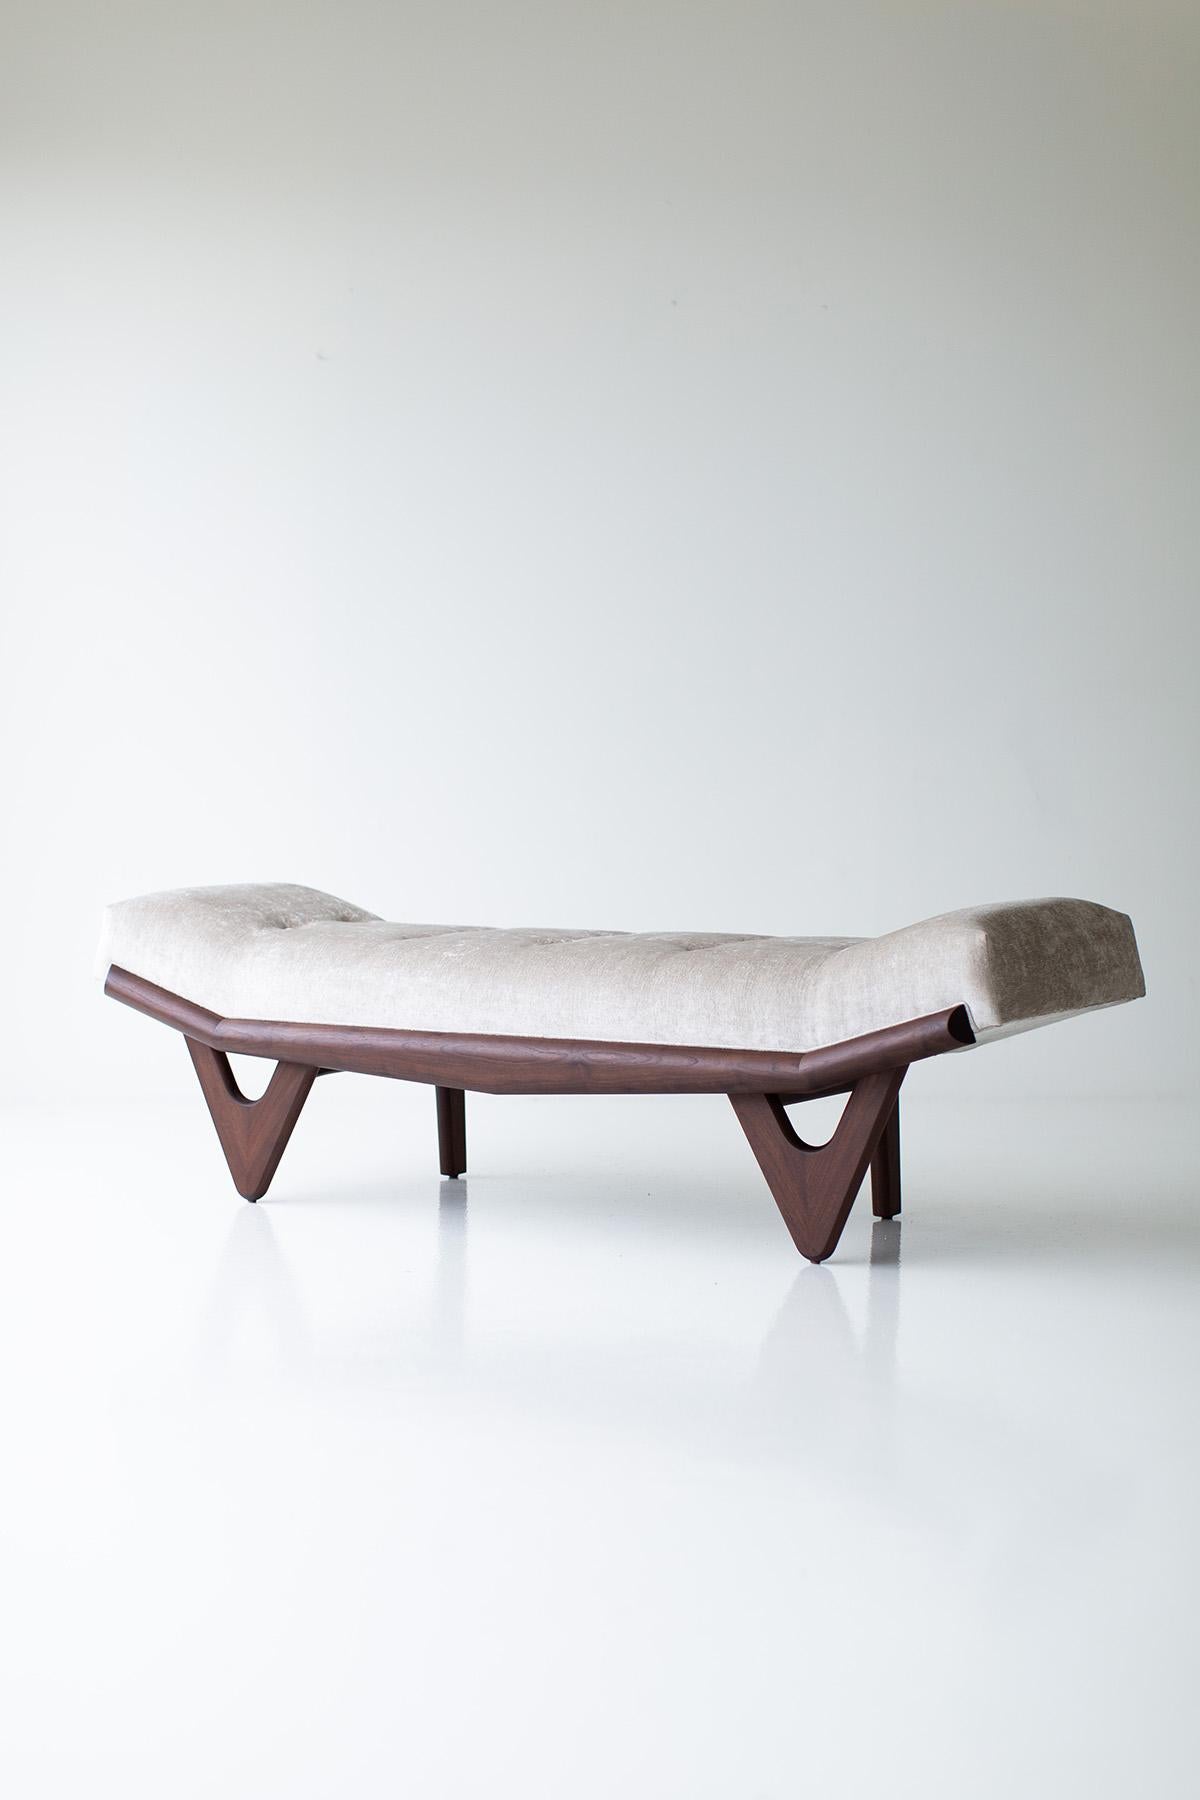 CraftAssociates Bench,  Alaska Modern Wood Bench, Walnut, Upholstered

This Alaska Modern Wood Bench in walnut is expertly crafted and upholstered. The bench boasts hand cut high-density foam and commercial grade fabric. The bench's frame and base